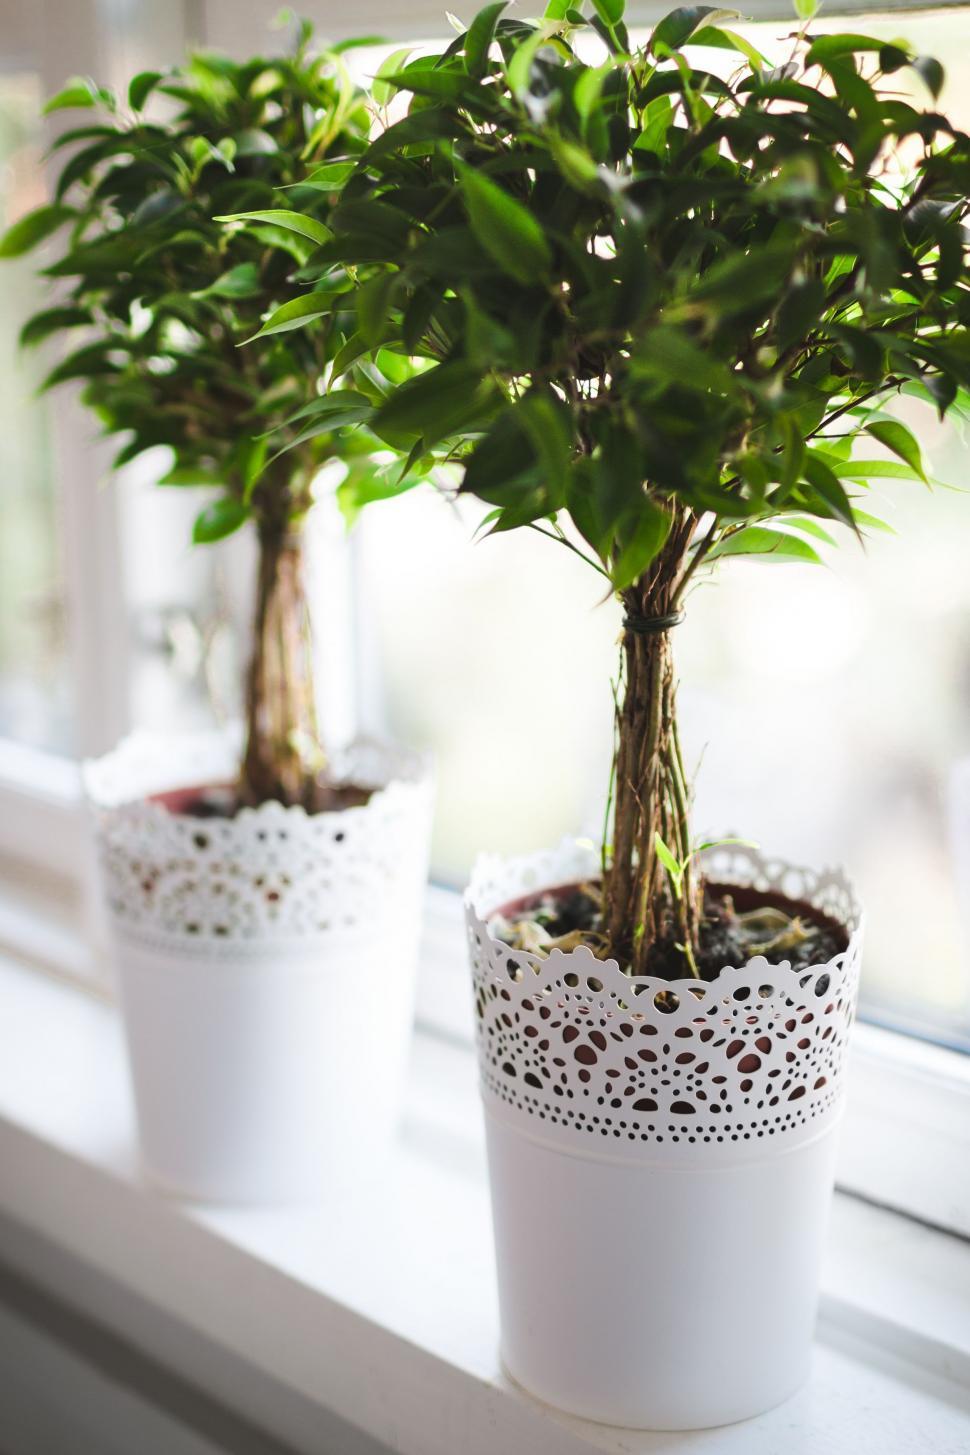 Free Image of Potted Plants on Window Sill 